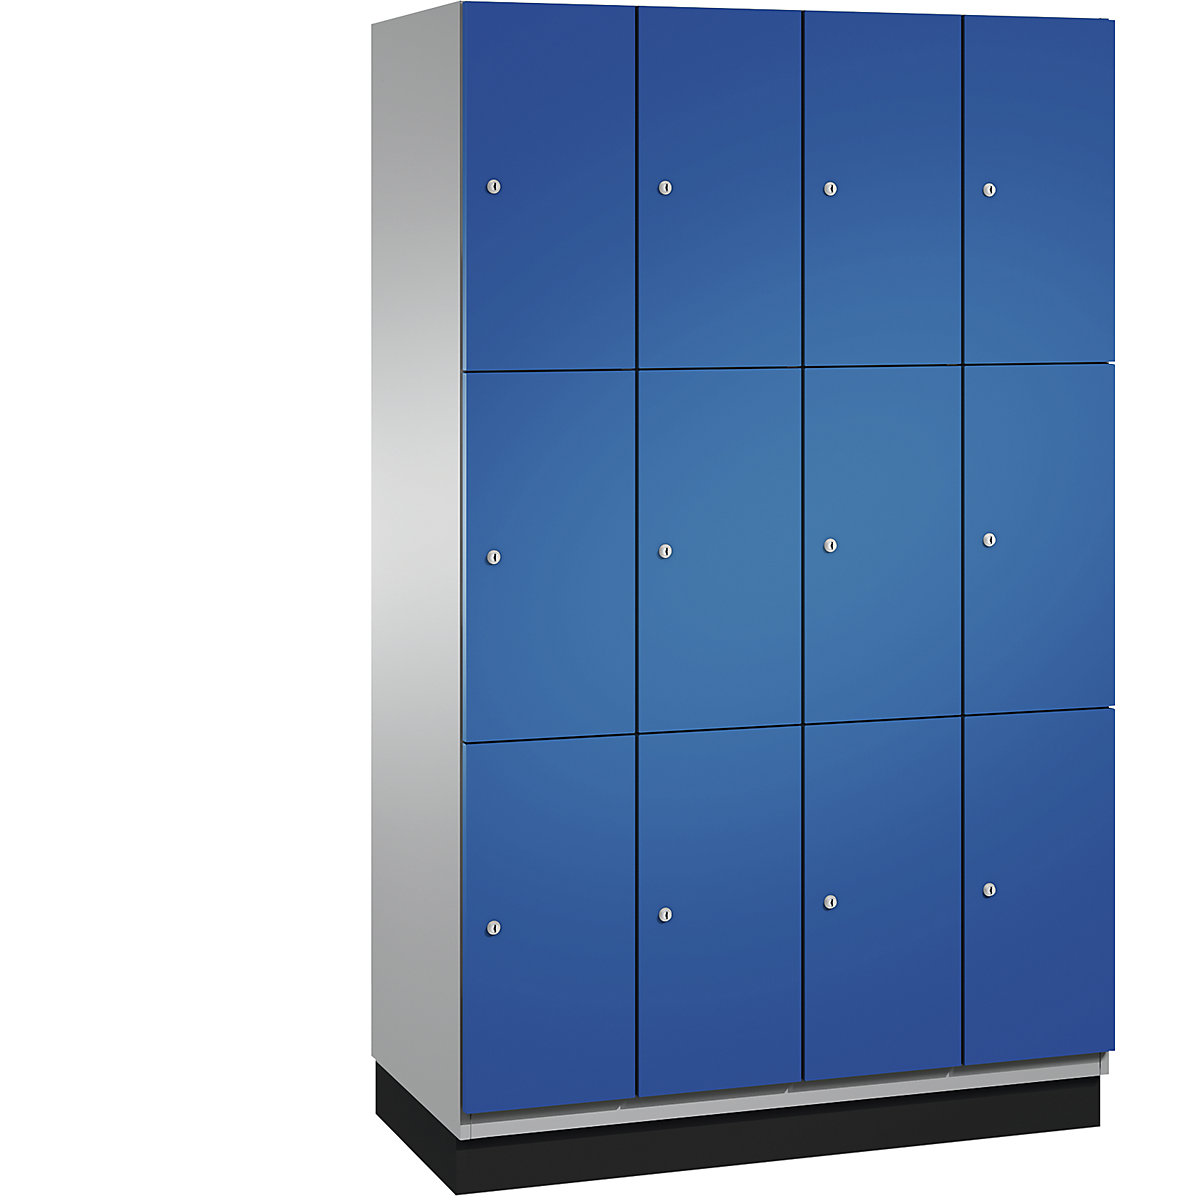 CAMBIO compartment locker with sheet steel doors – C+P, 12 compartments, width 1200 mm, body white aluminium / door gentian blue, compartment height 616.6 mm-25